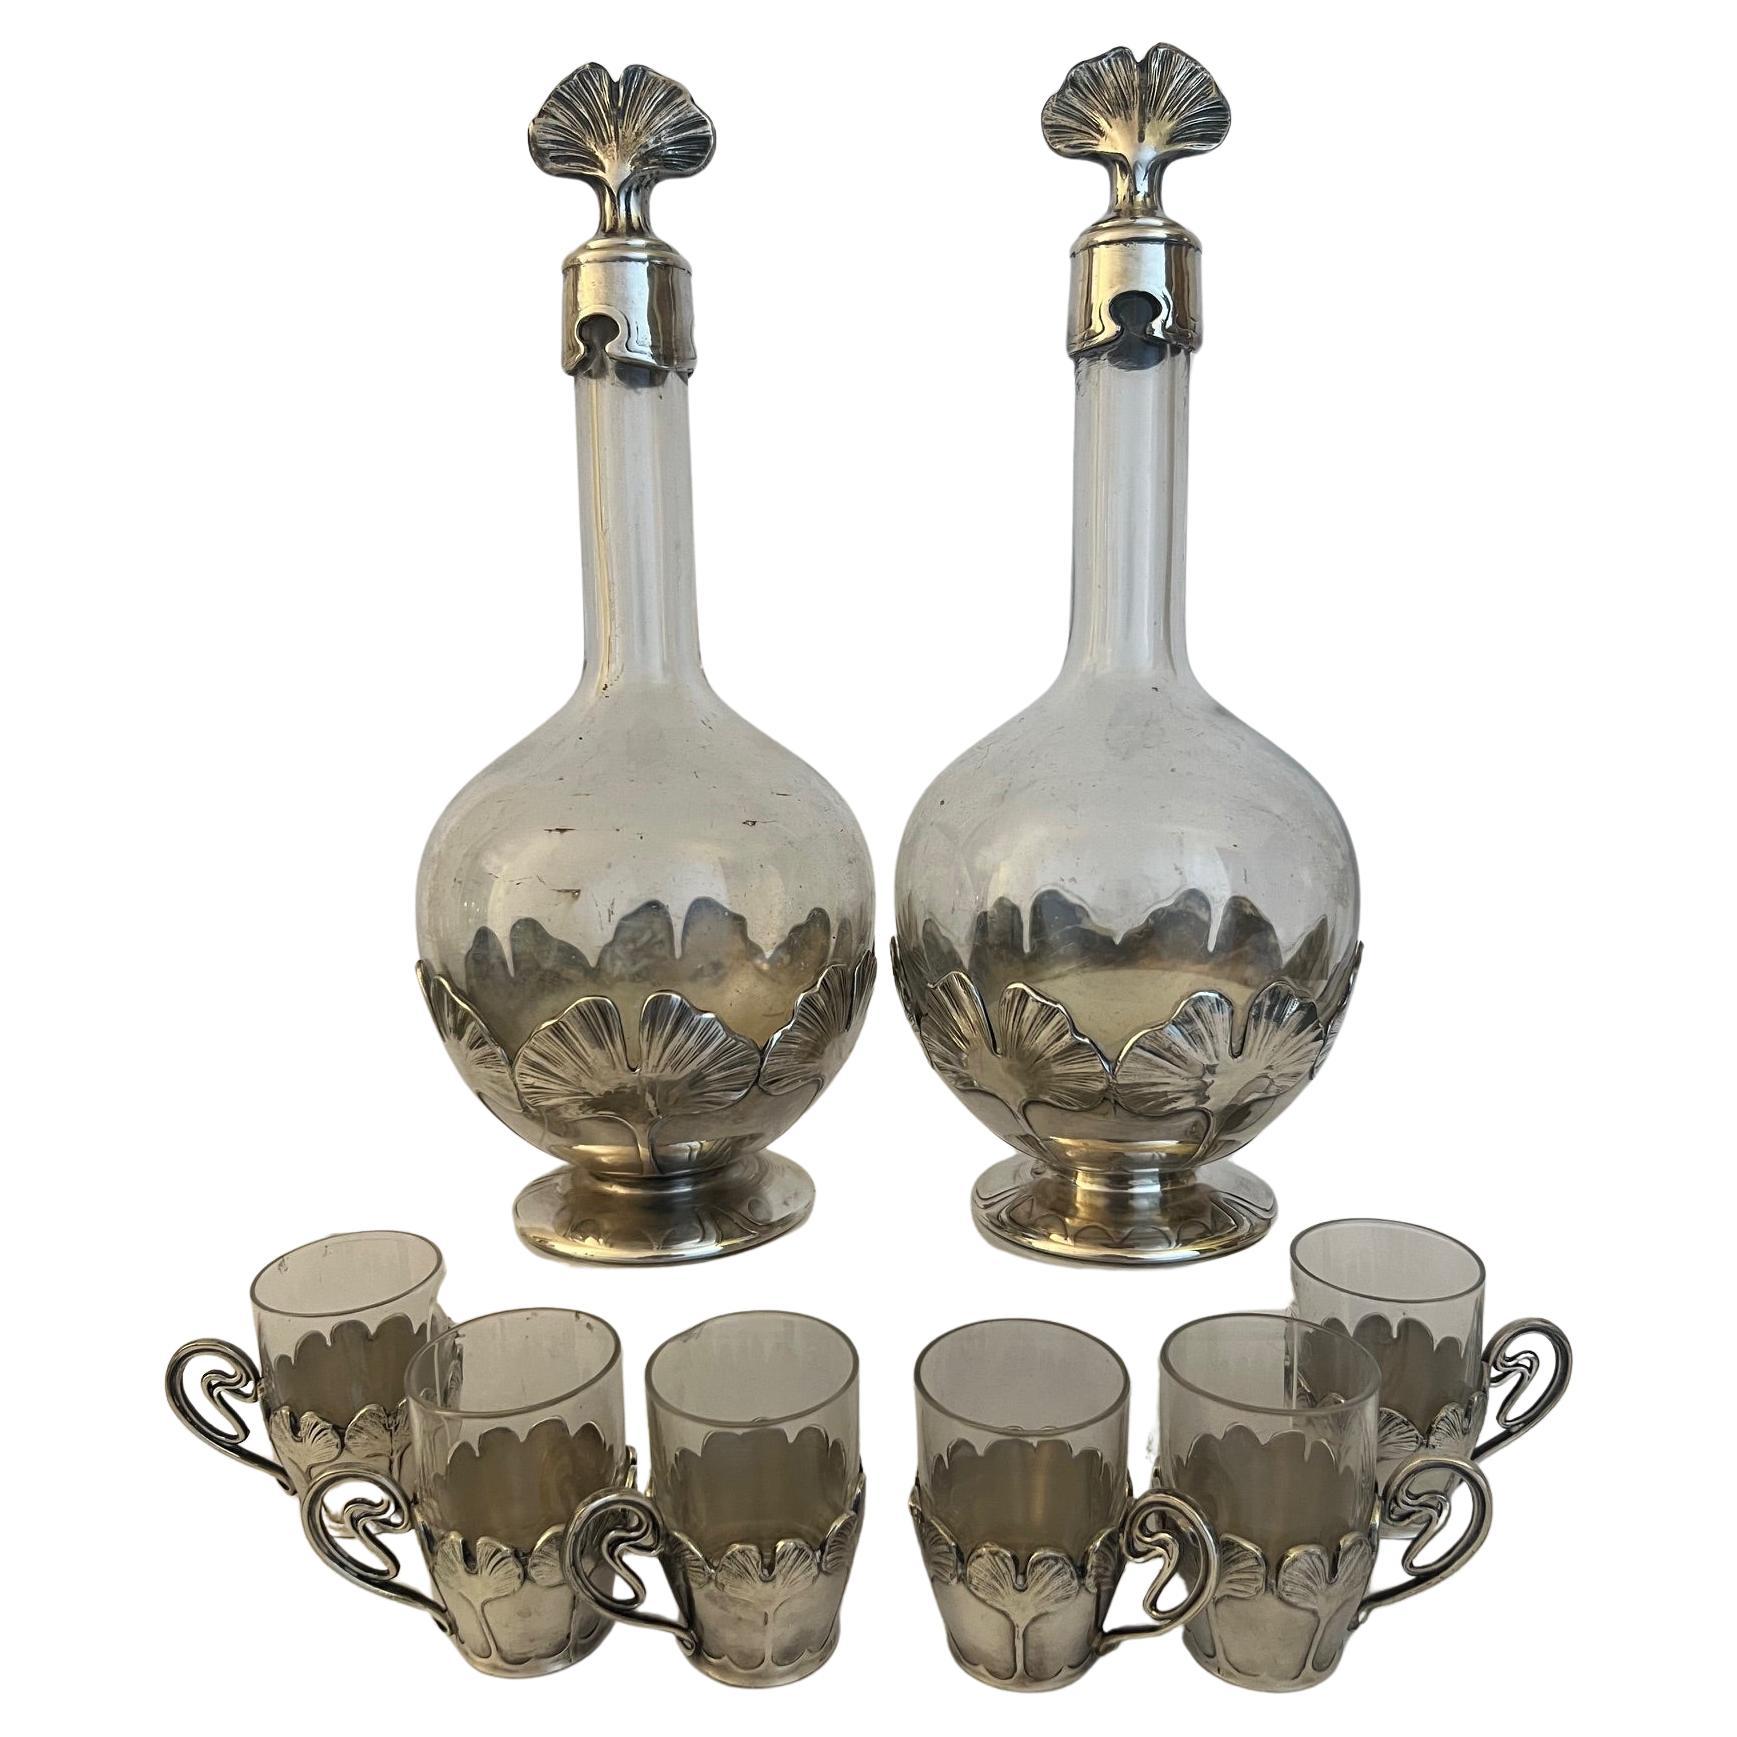 French Early 20th Century Christofle Art Nouveau Decanter and Glass Set of 8 For Sale